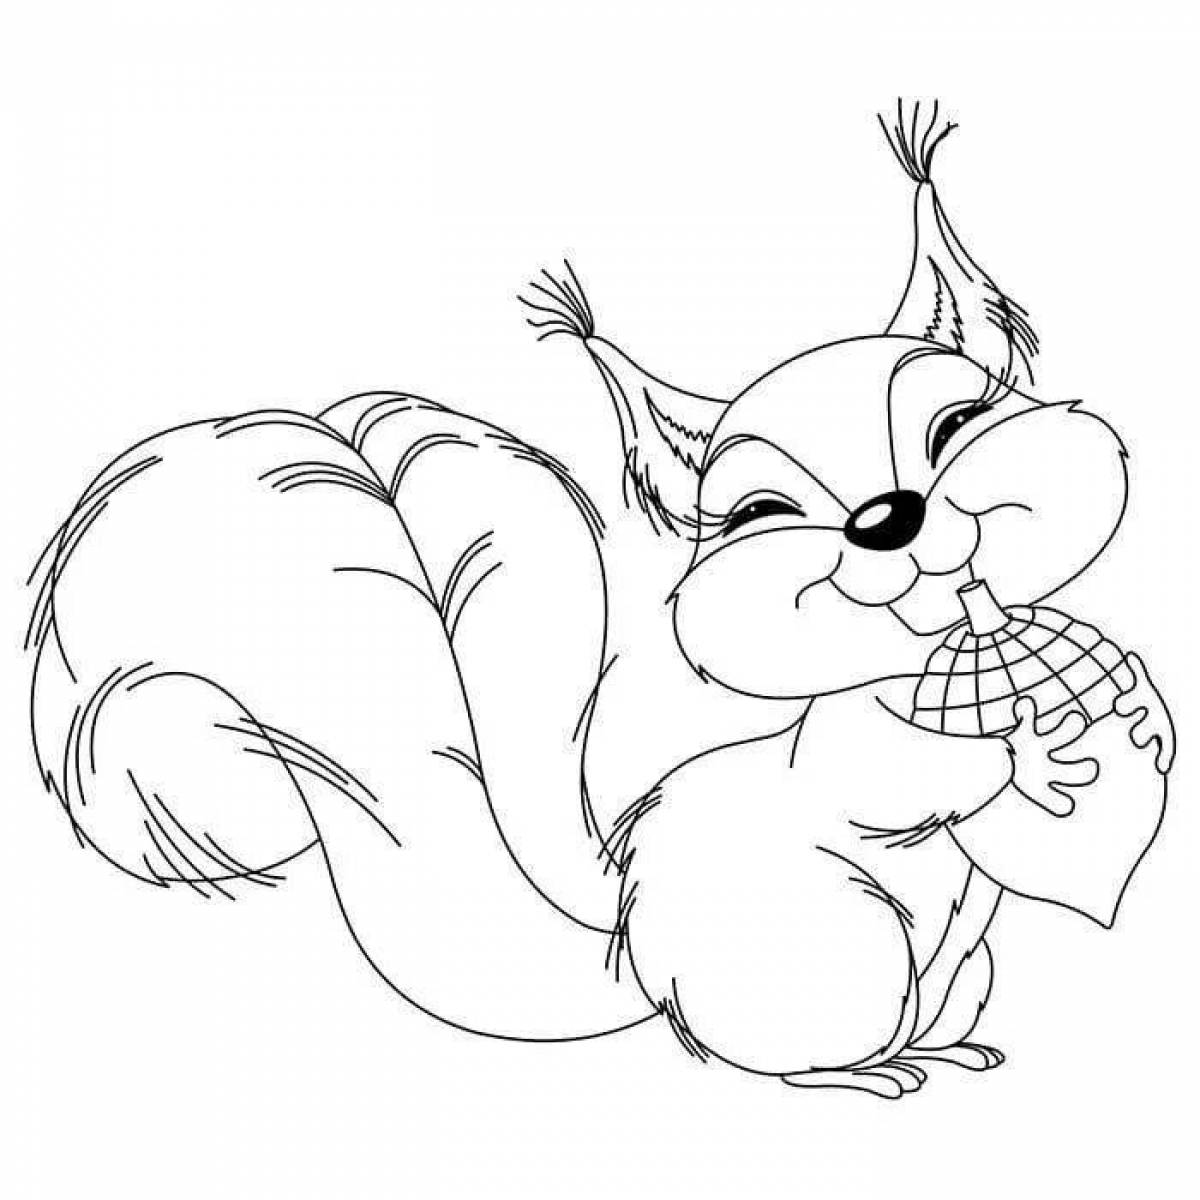 Giggly coloring squirrel